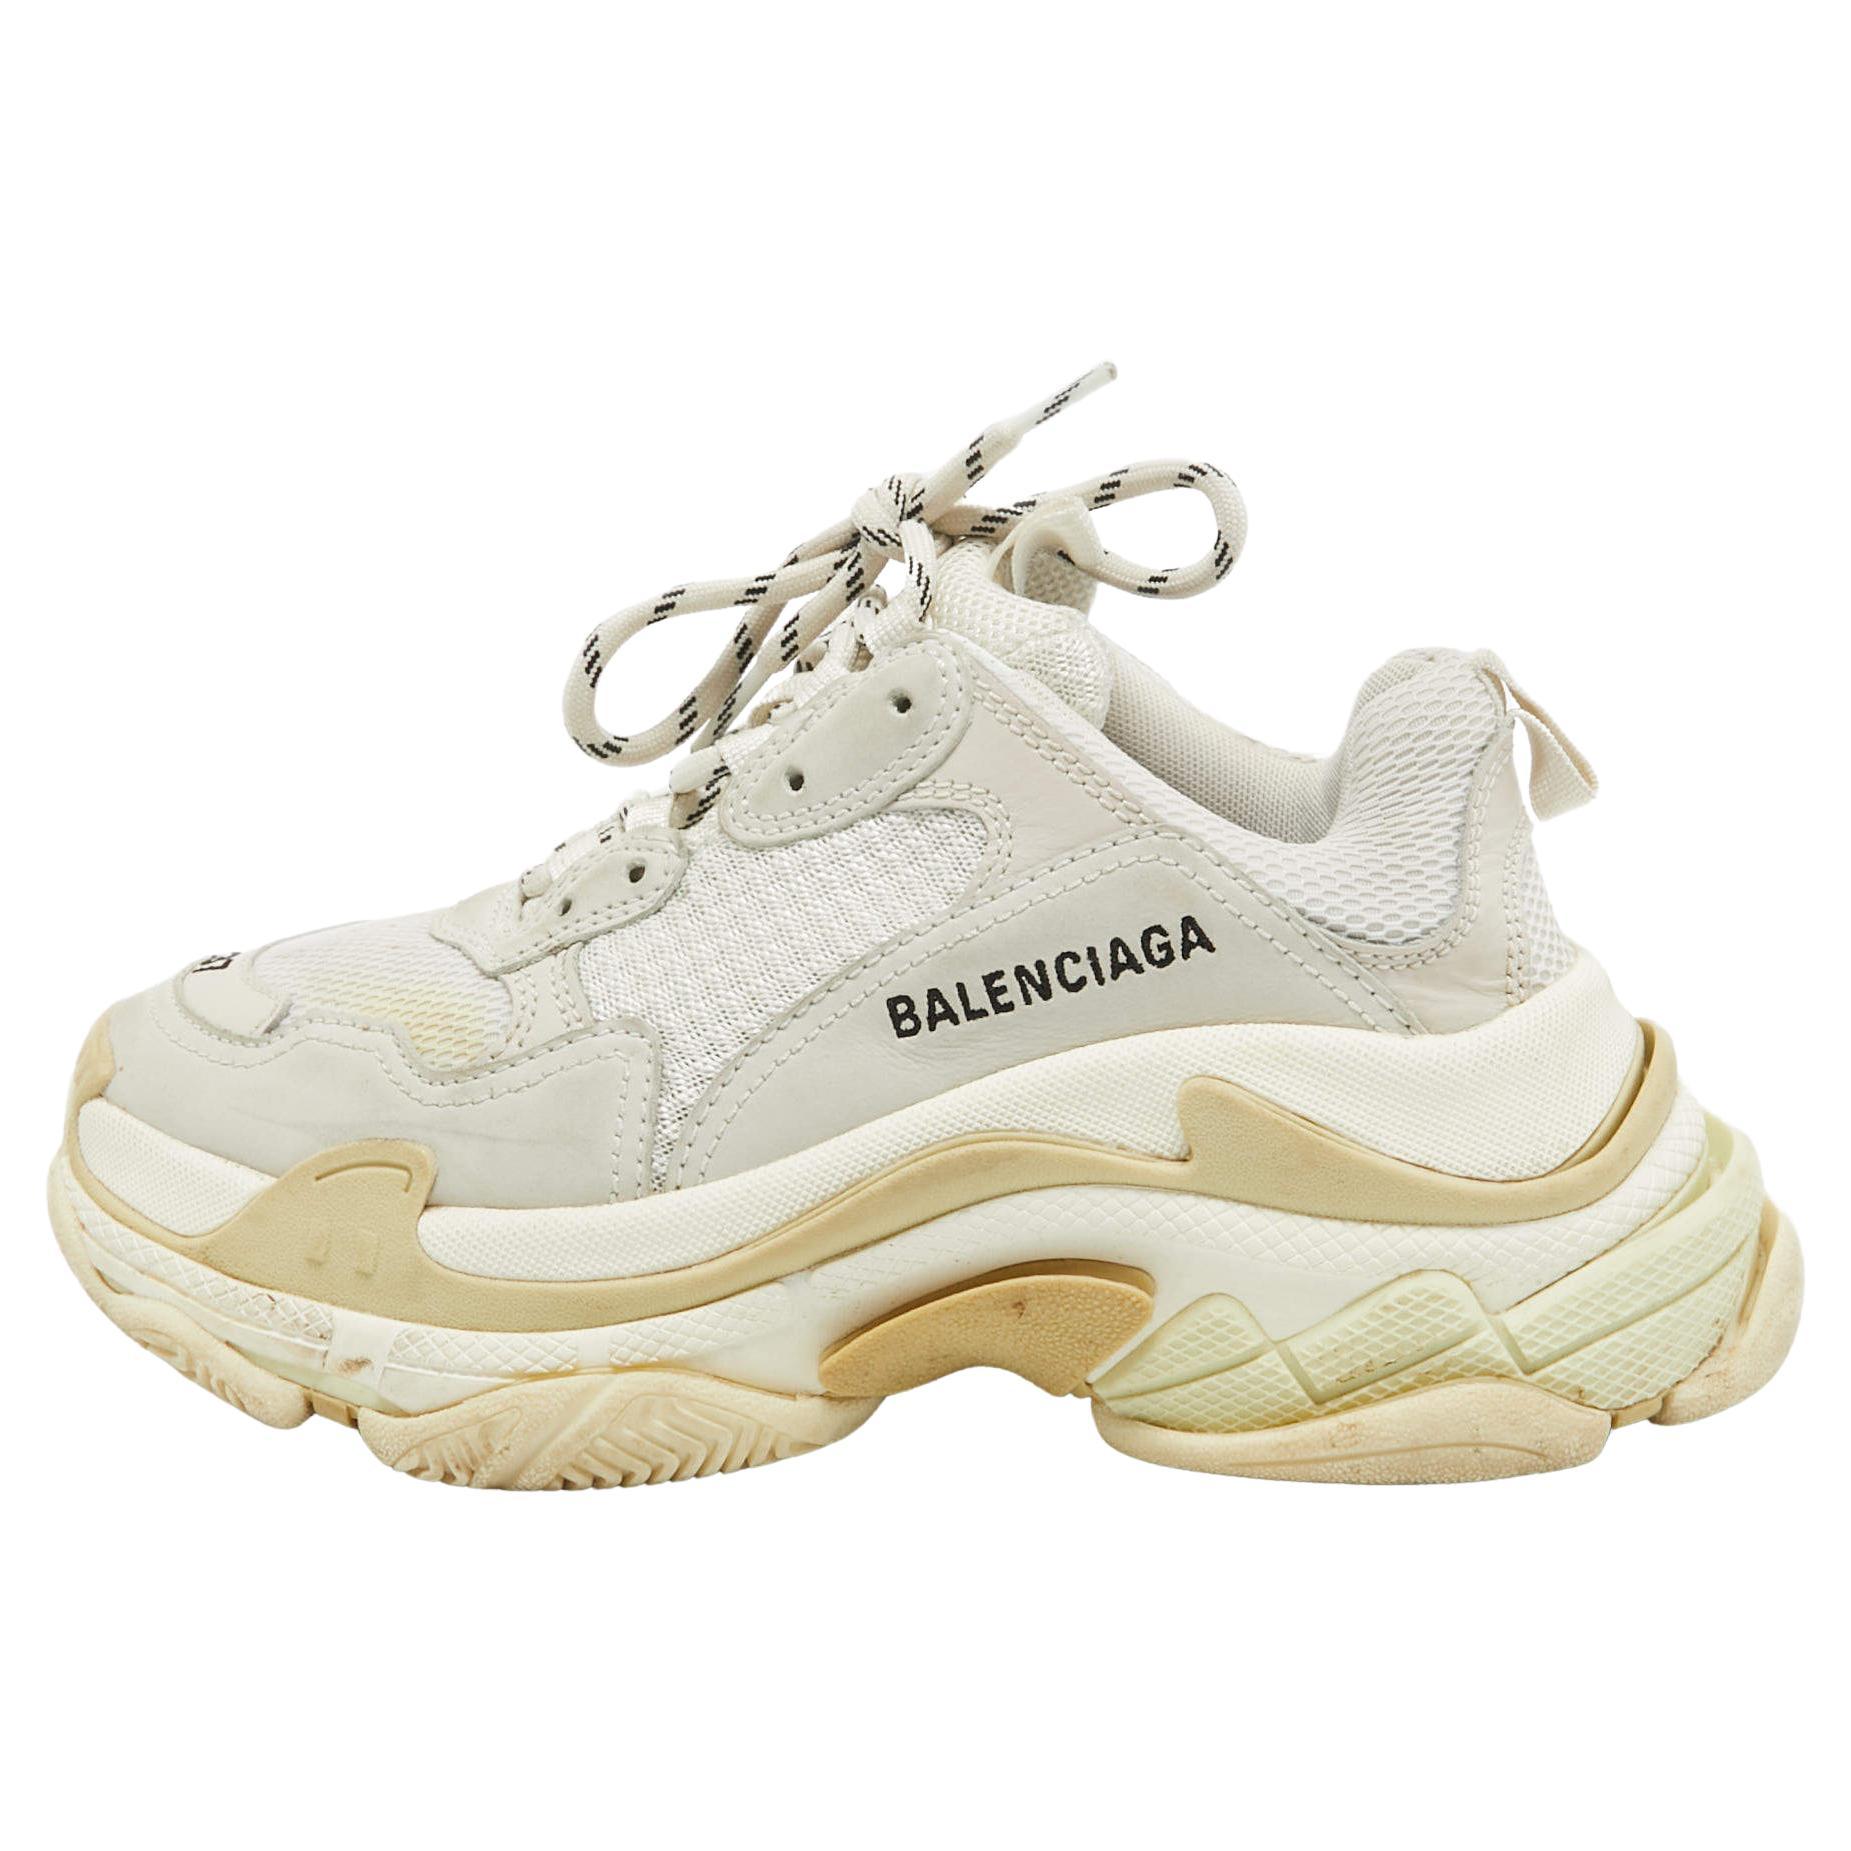 Balenciaga White/Grey Mesh and Leather Triple S Low Top Sneakers Size 37 For Sale